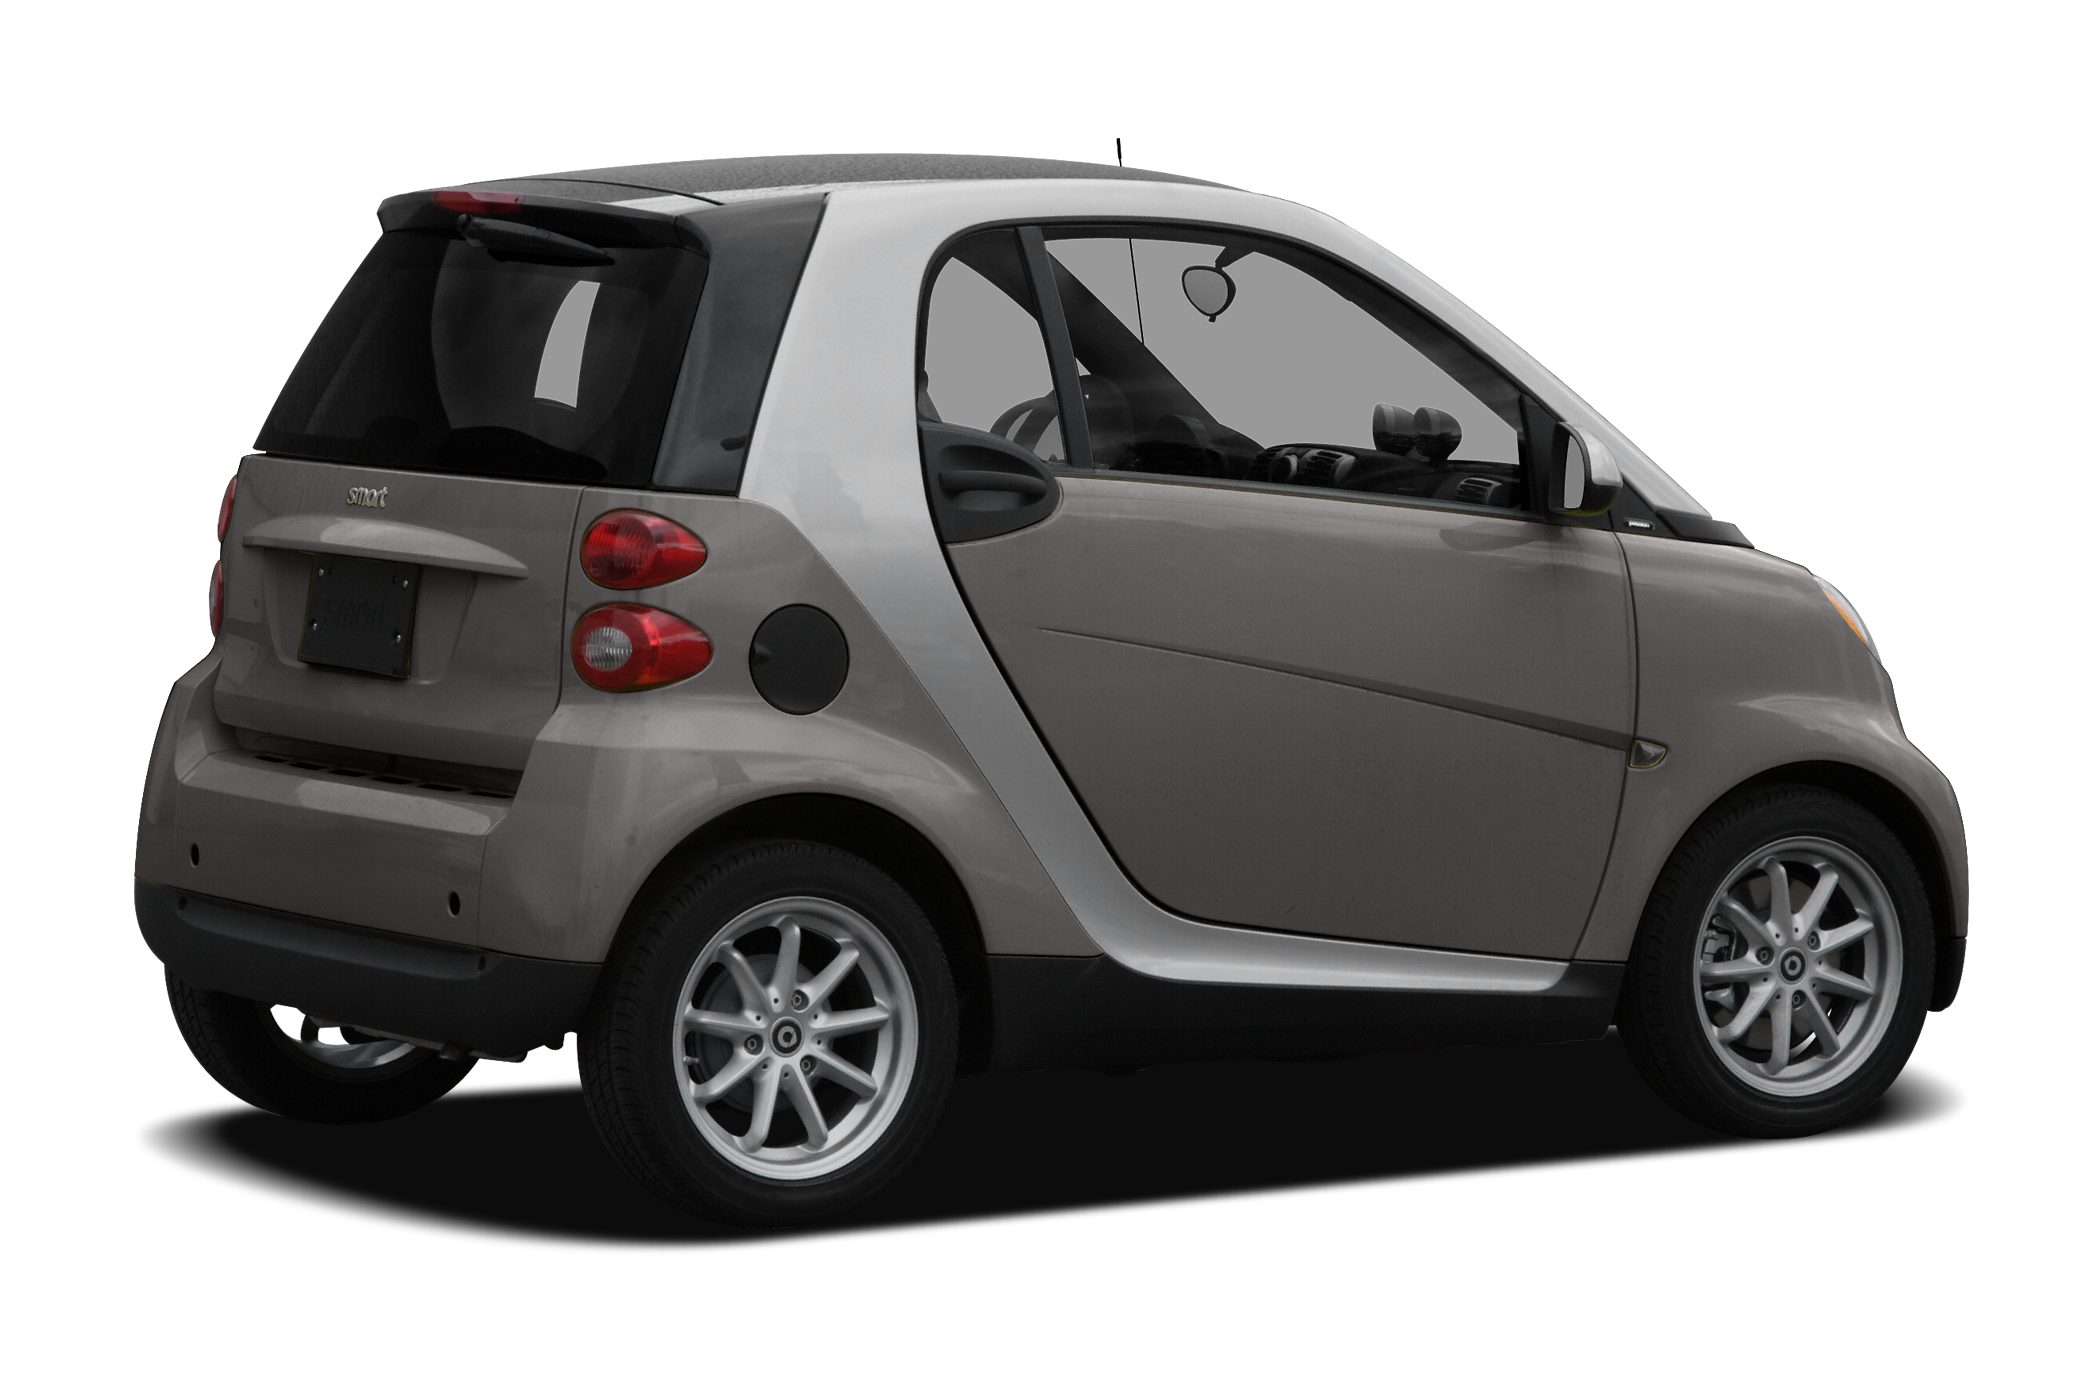 2009 smart ForTwo